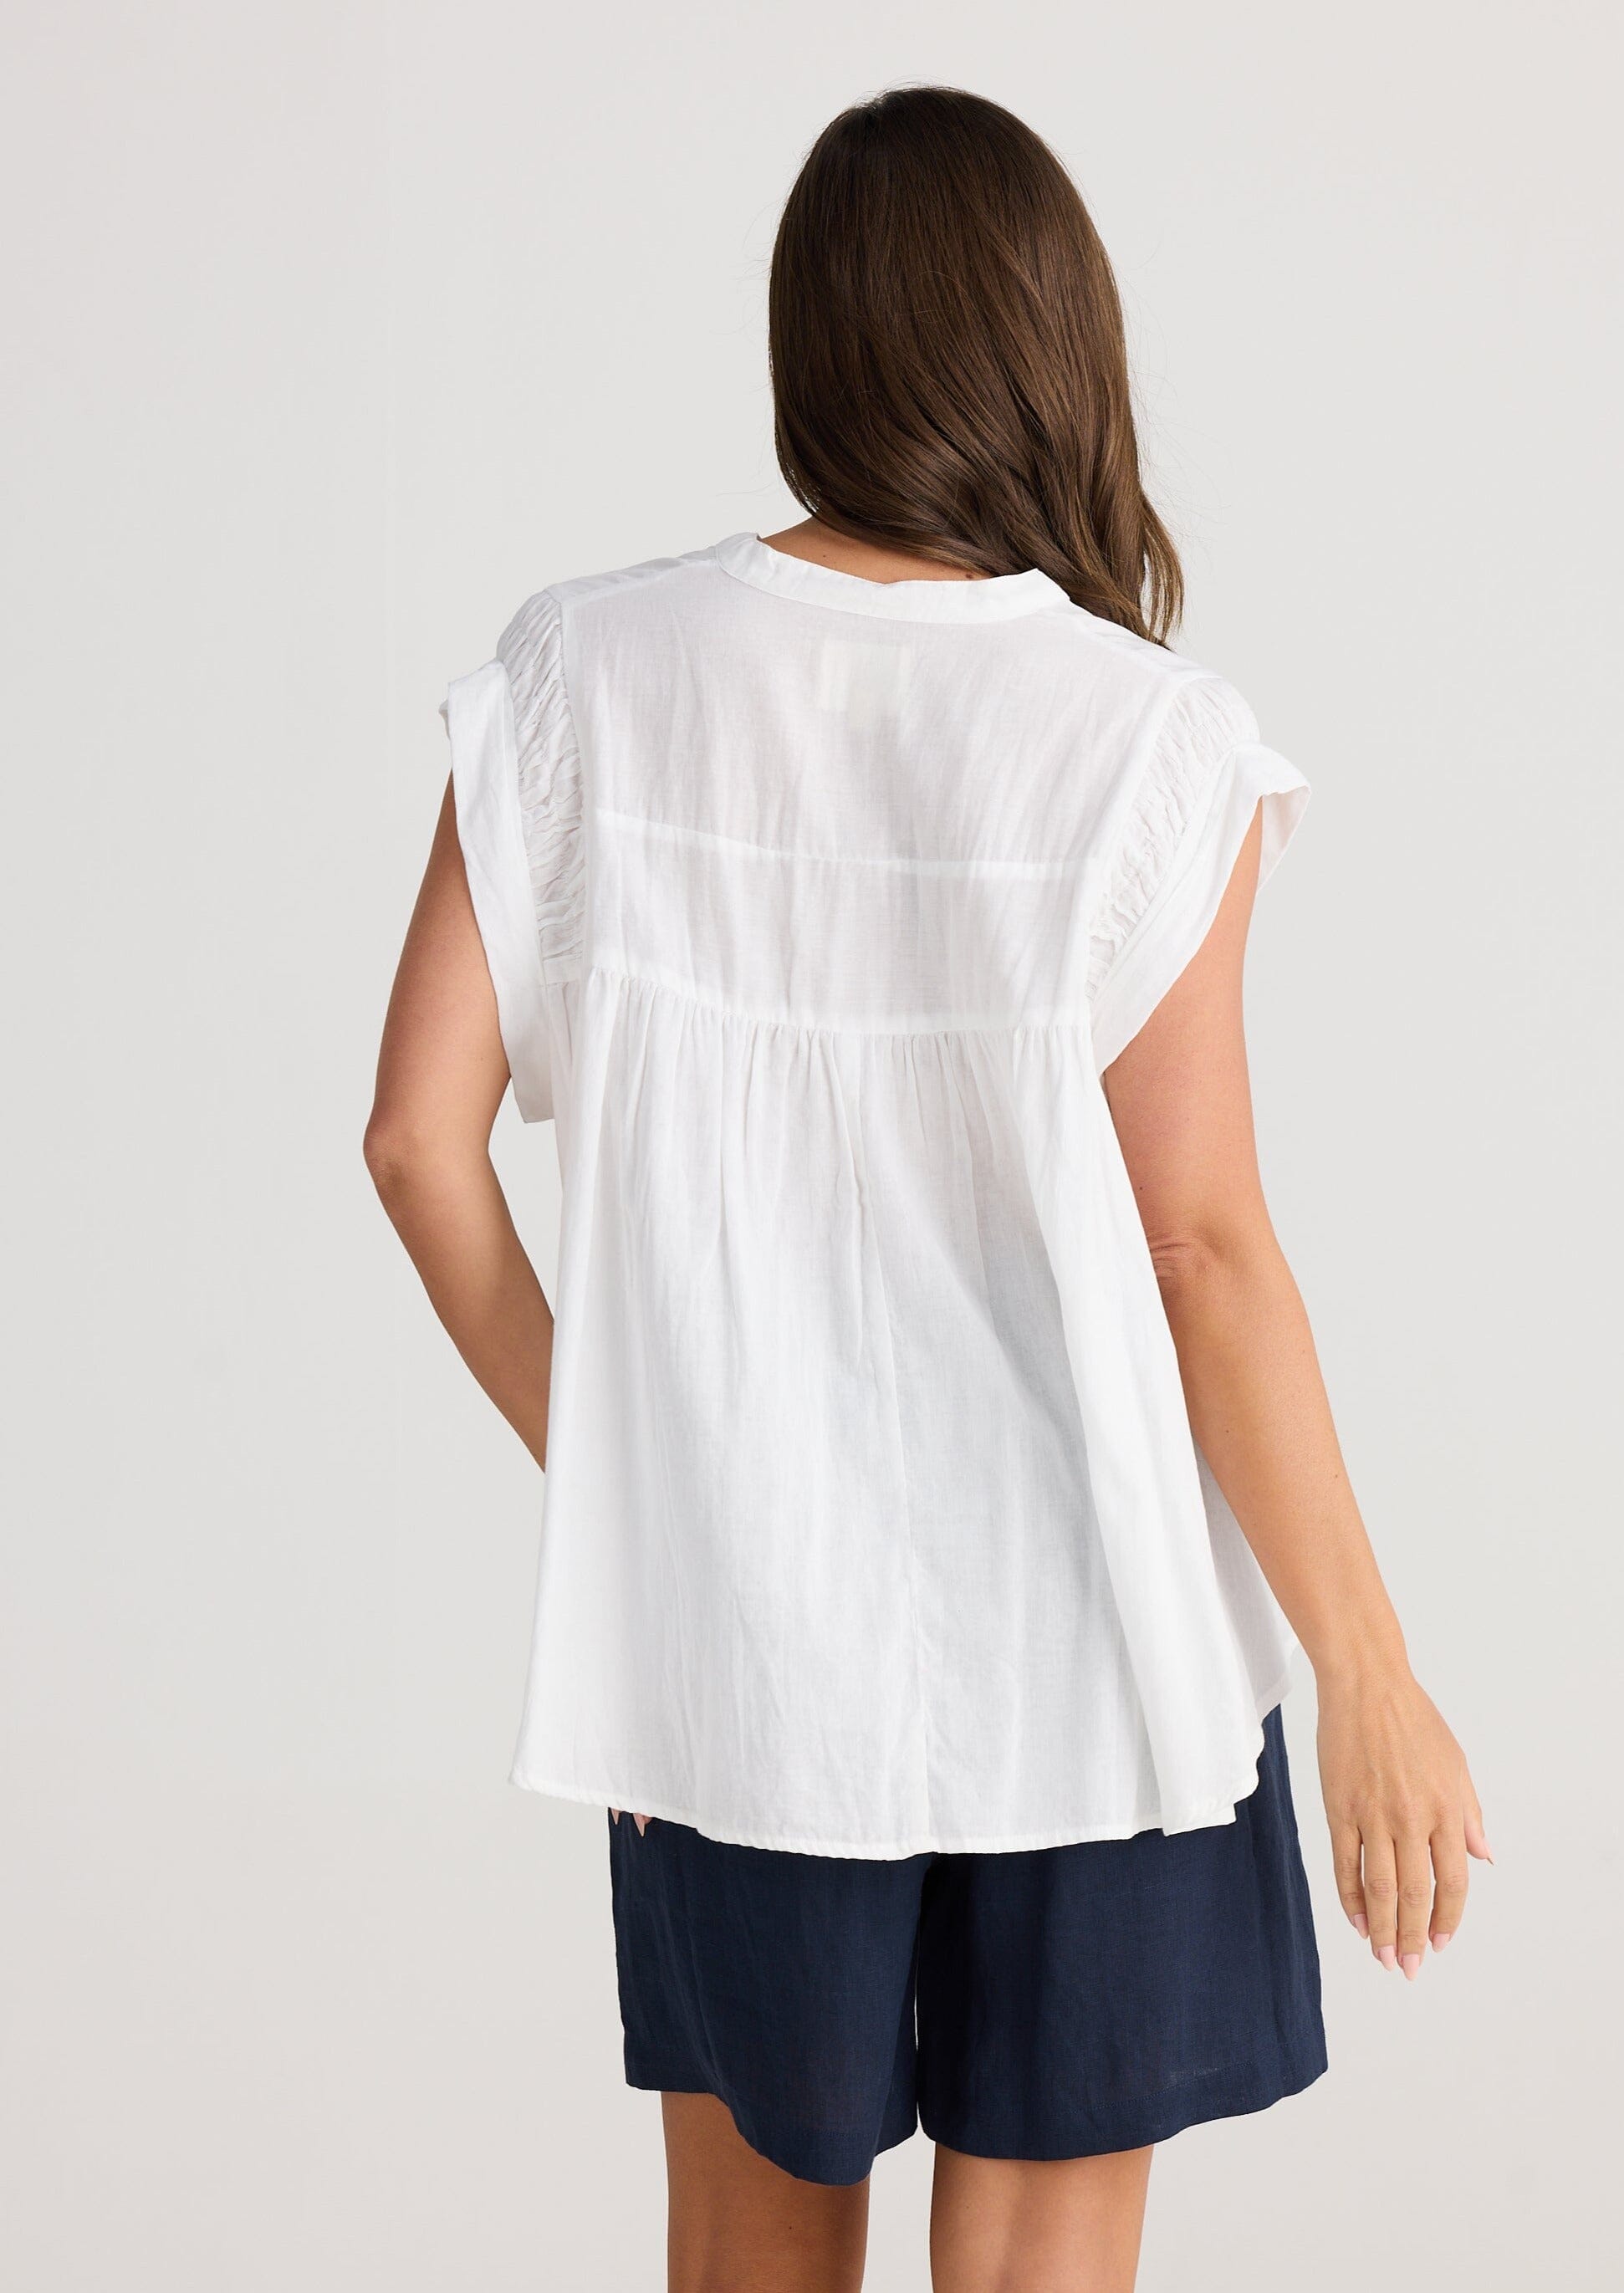 Clementine Top-White Top Holiday 